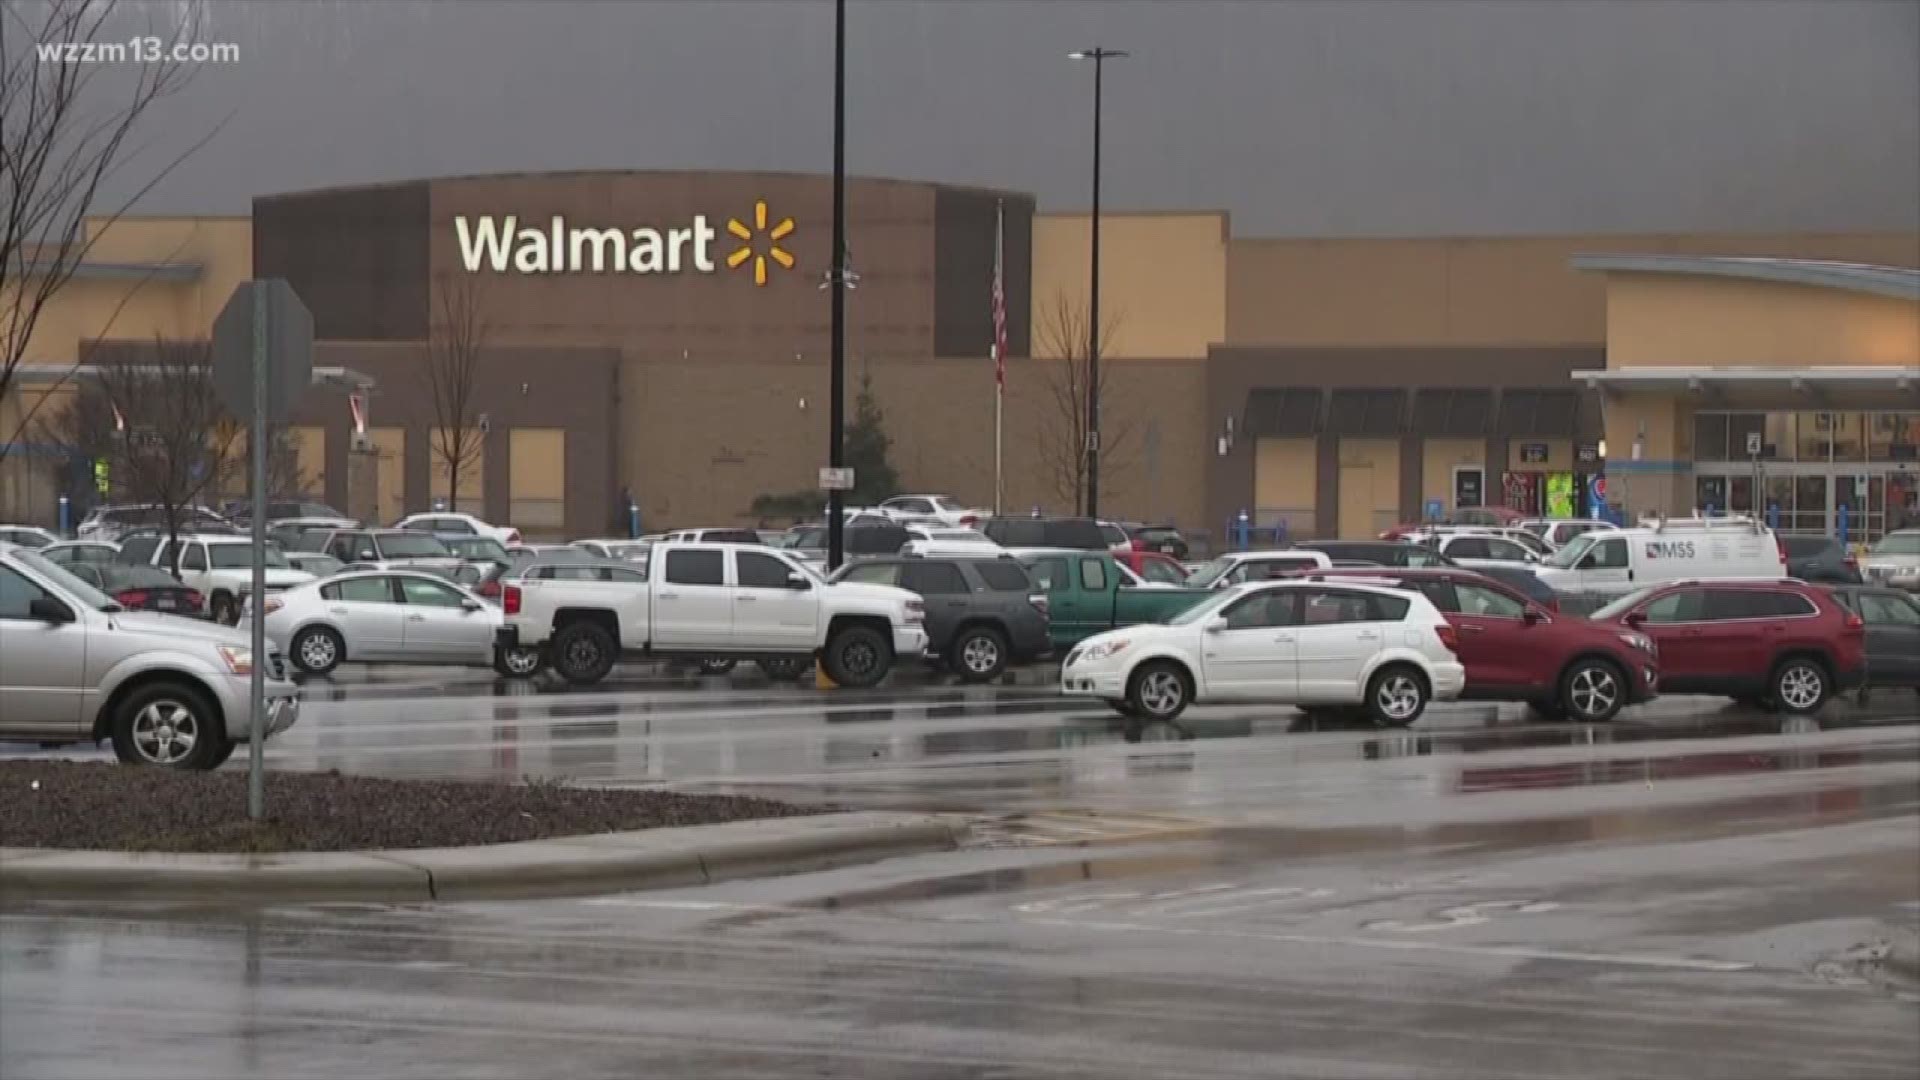 Walmart faces pushback for plan to eliminate greeters